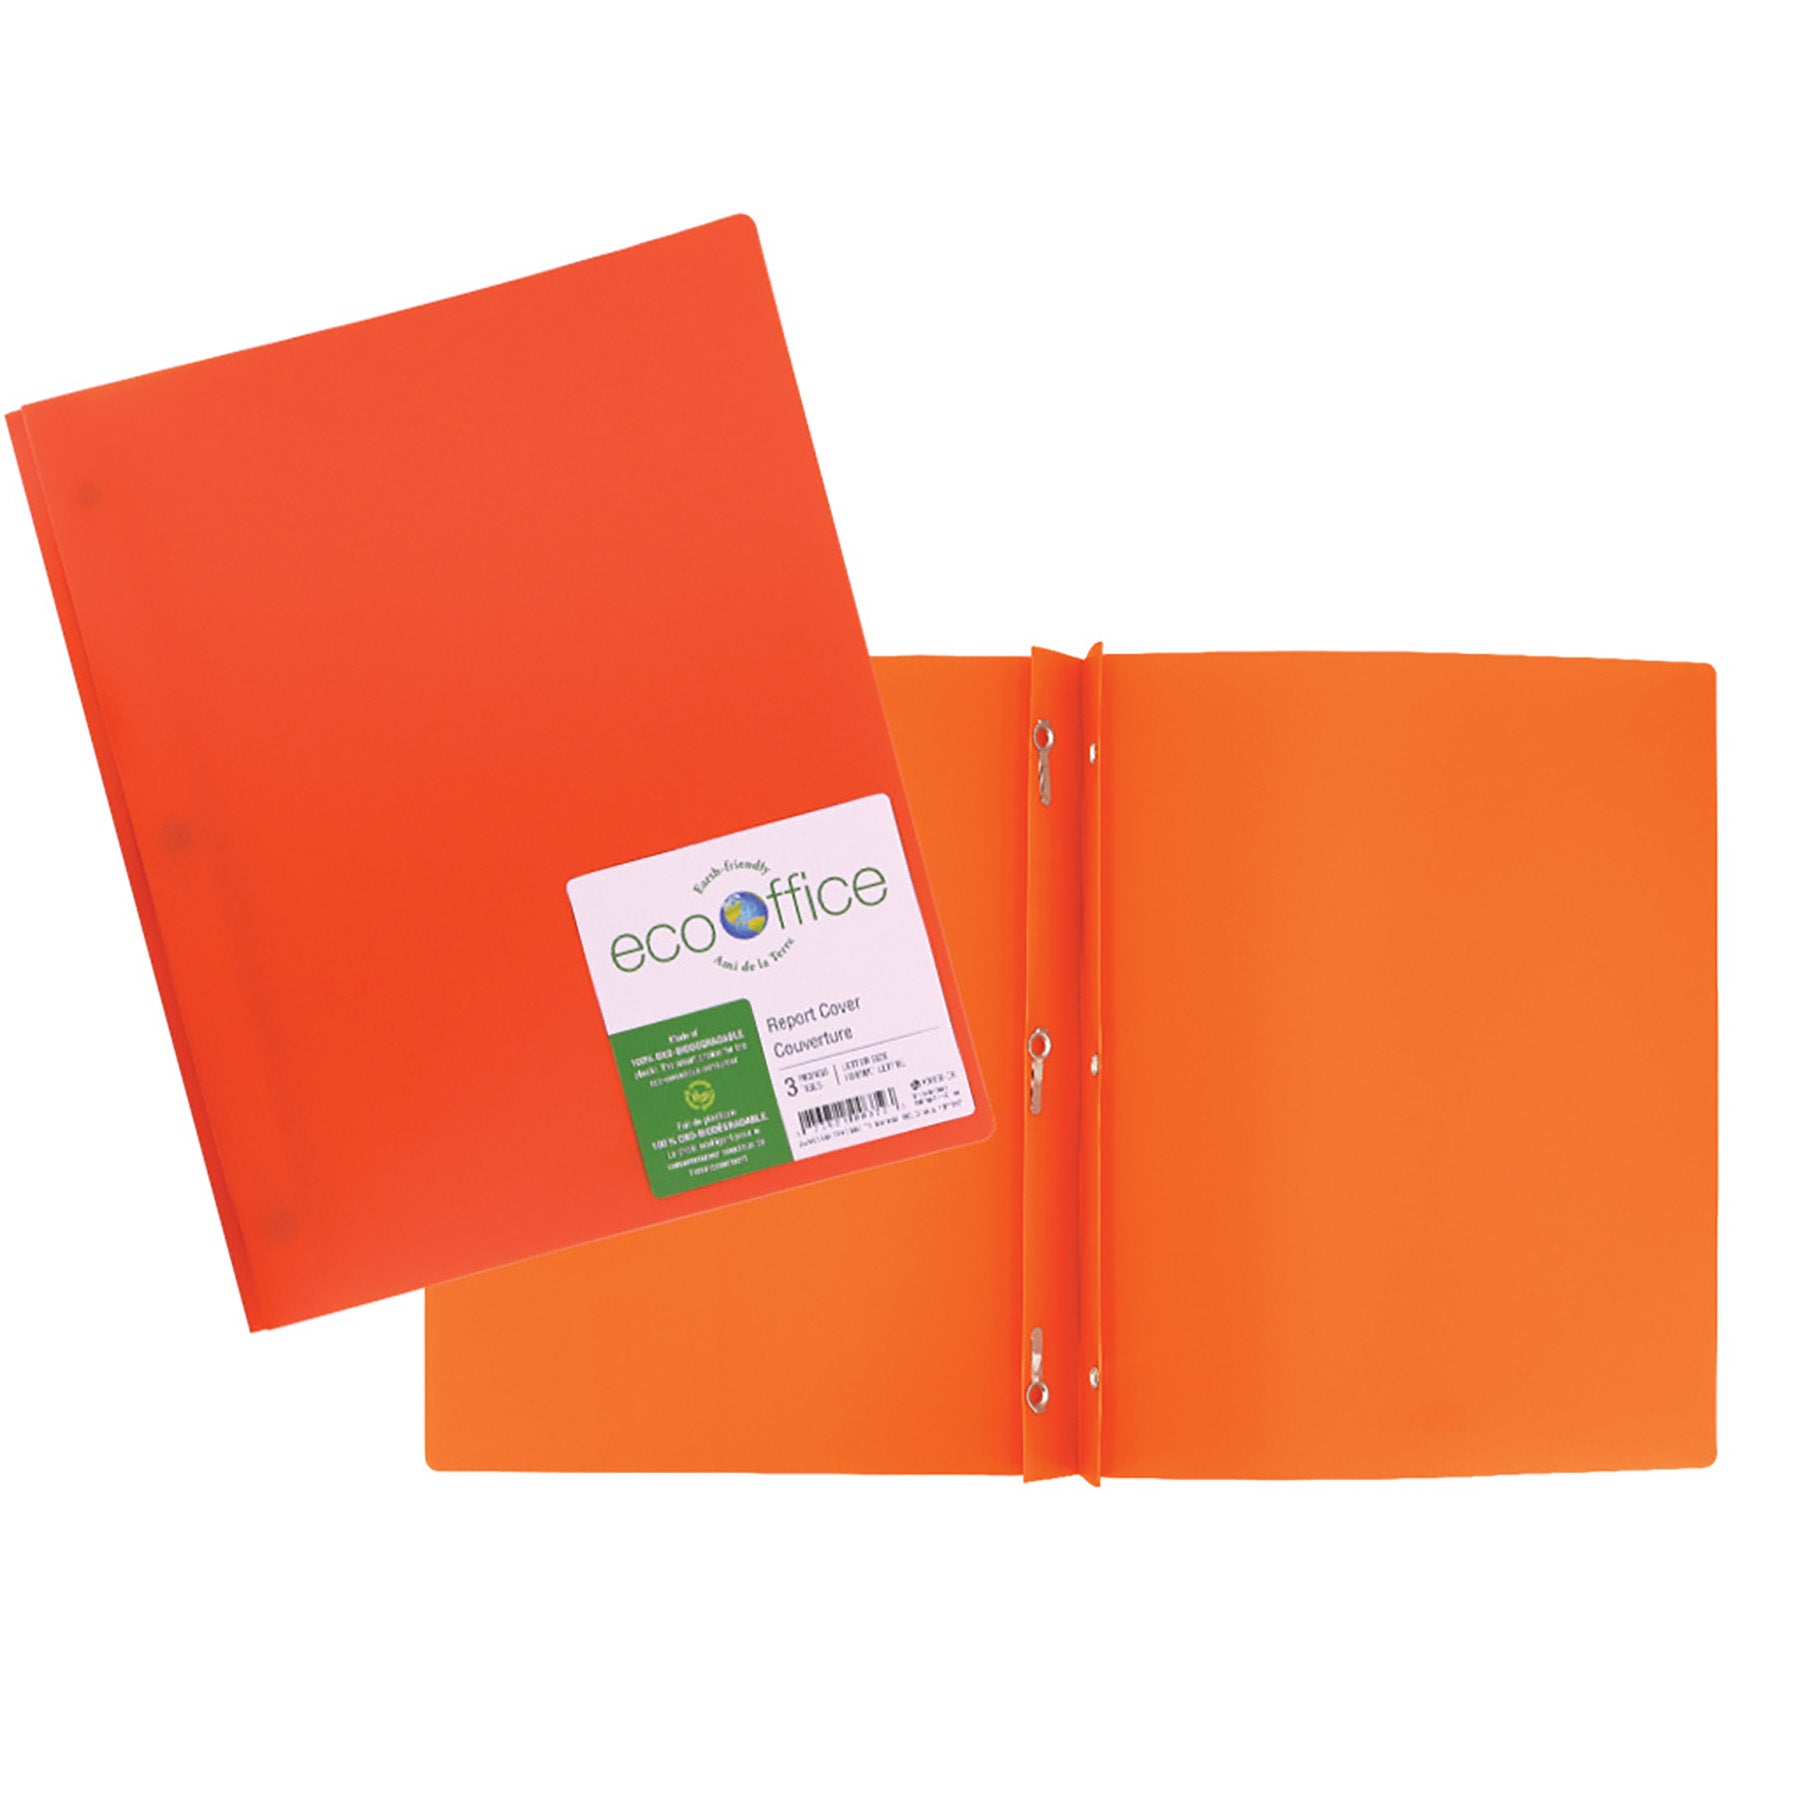 EcoOffice 3-Prong Report Cover Orange Plastic 11.5x9.25in